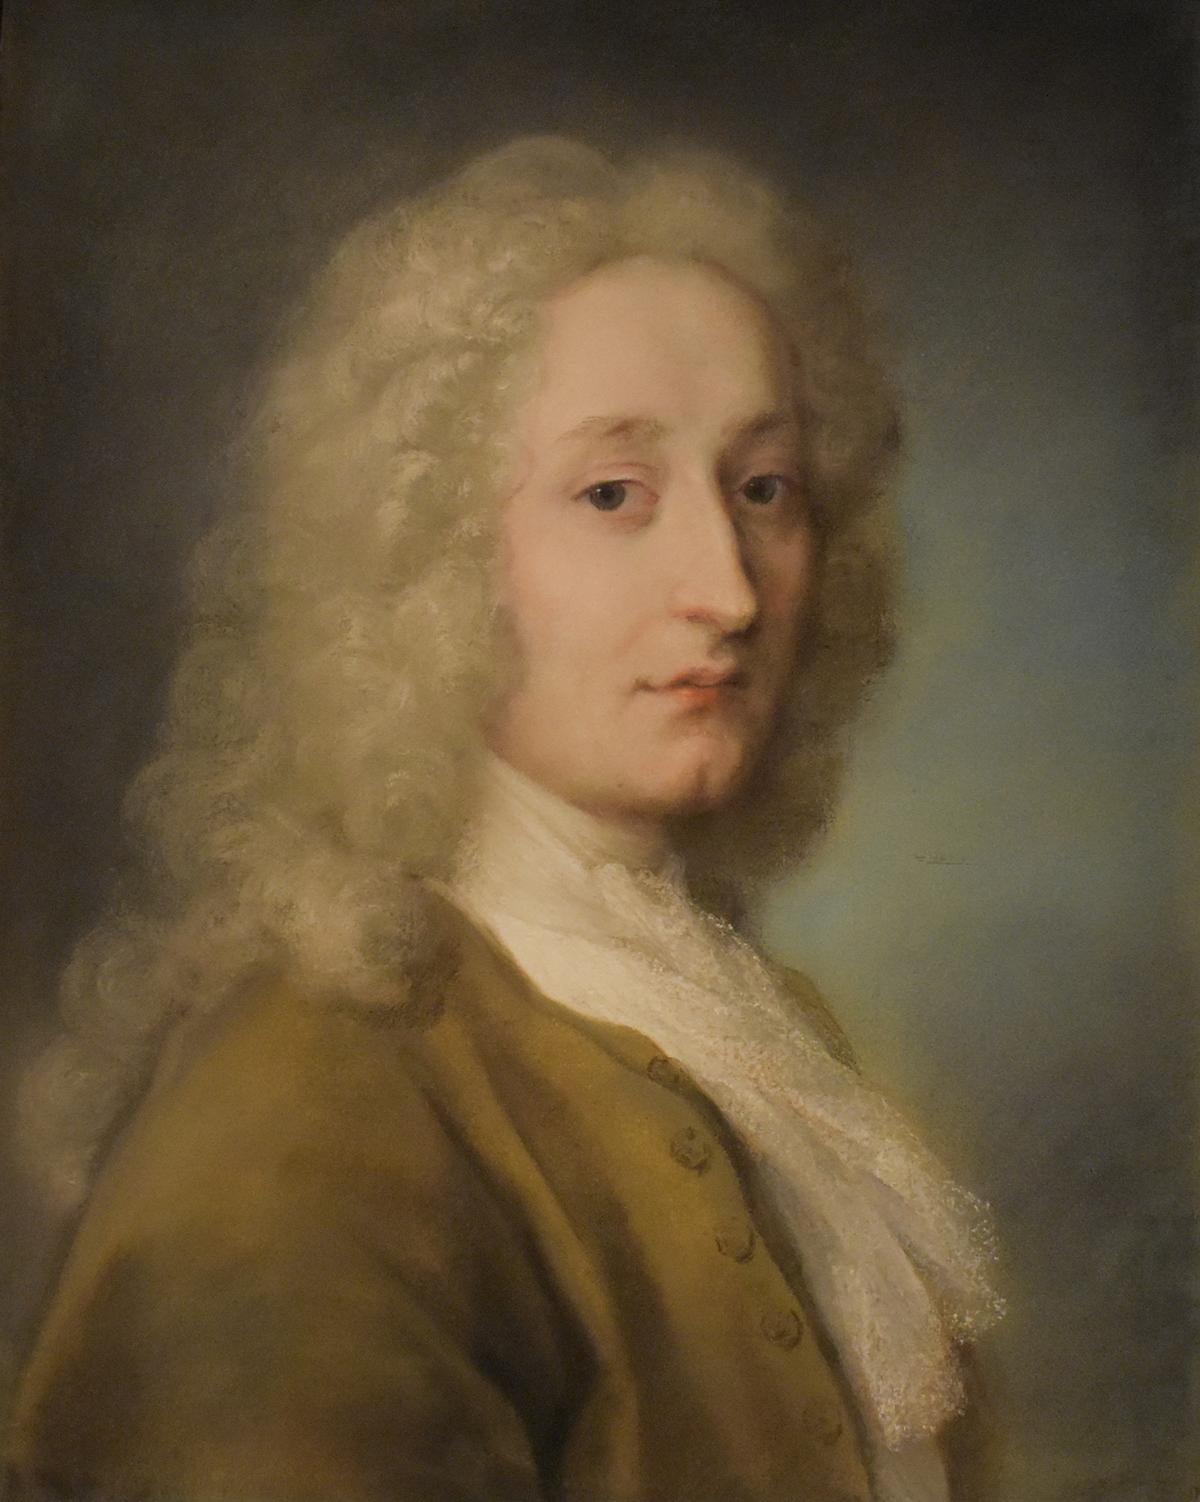 Portrait of Antoine Watteau, 1721, by Rosalba Carriera. Pastel on paper. Luigi Bailo Museum, Treviso, Italy. (<a href="https://commons.wikimedia.org/wiki/File:Rosalba_Carriera,_ritratto_di_gentiluomo_Antoine_Watteau,_Complesso_di_Santa_Caterina.jpg">Nicola Quirico</a>/<a href="https://creativecommons.org/licenses/by-sa/4.0/deed.en">CC BY-SA 4.0 DEED</a>)